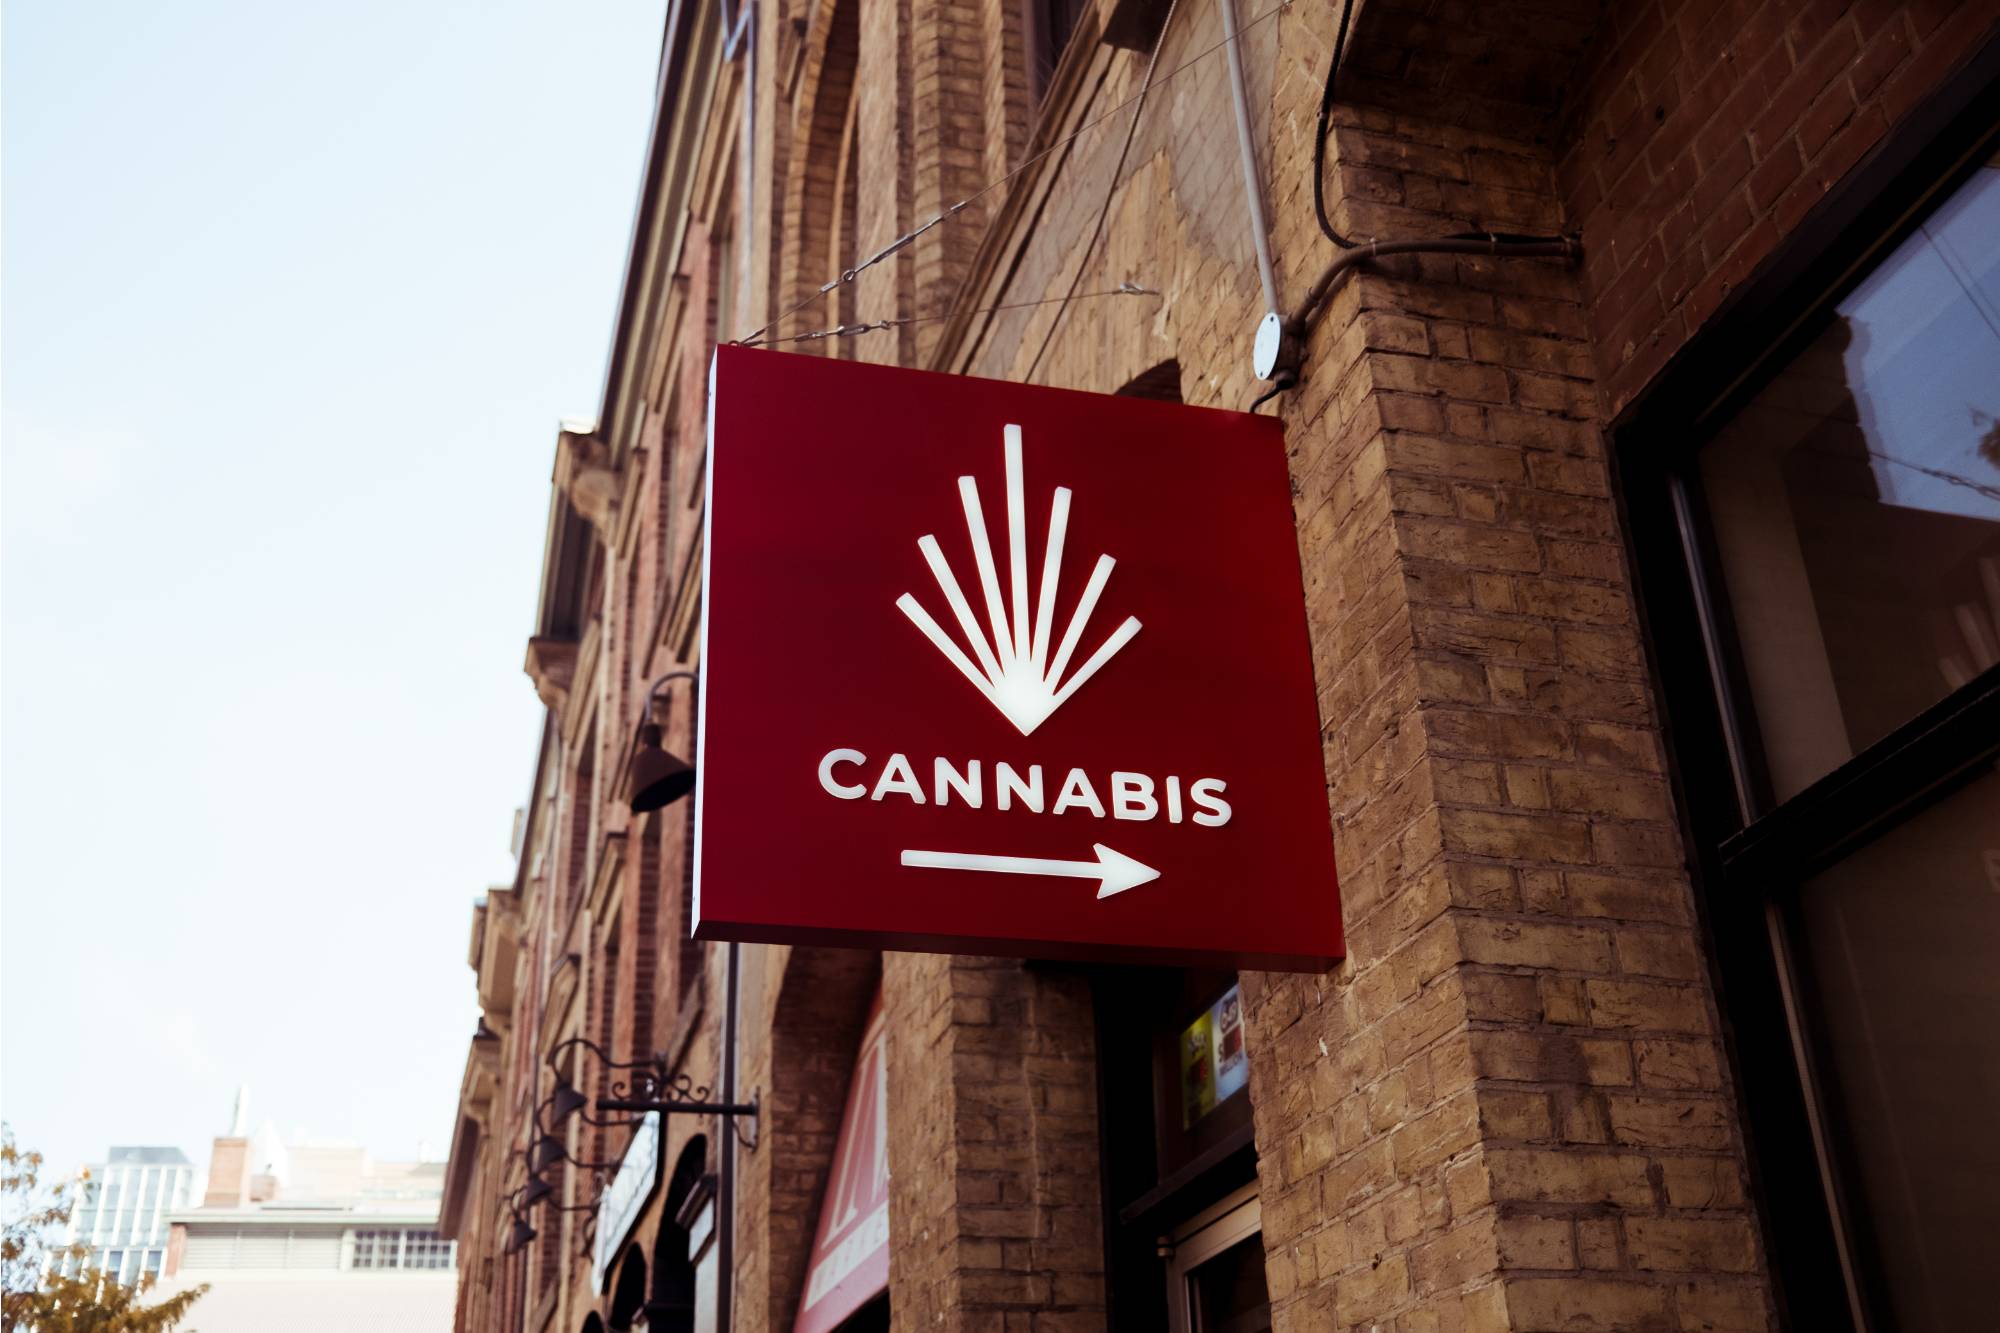 upward view of cannabis shop sign with a cannabis leaf on a maroon background